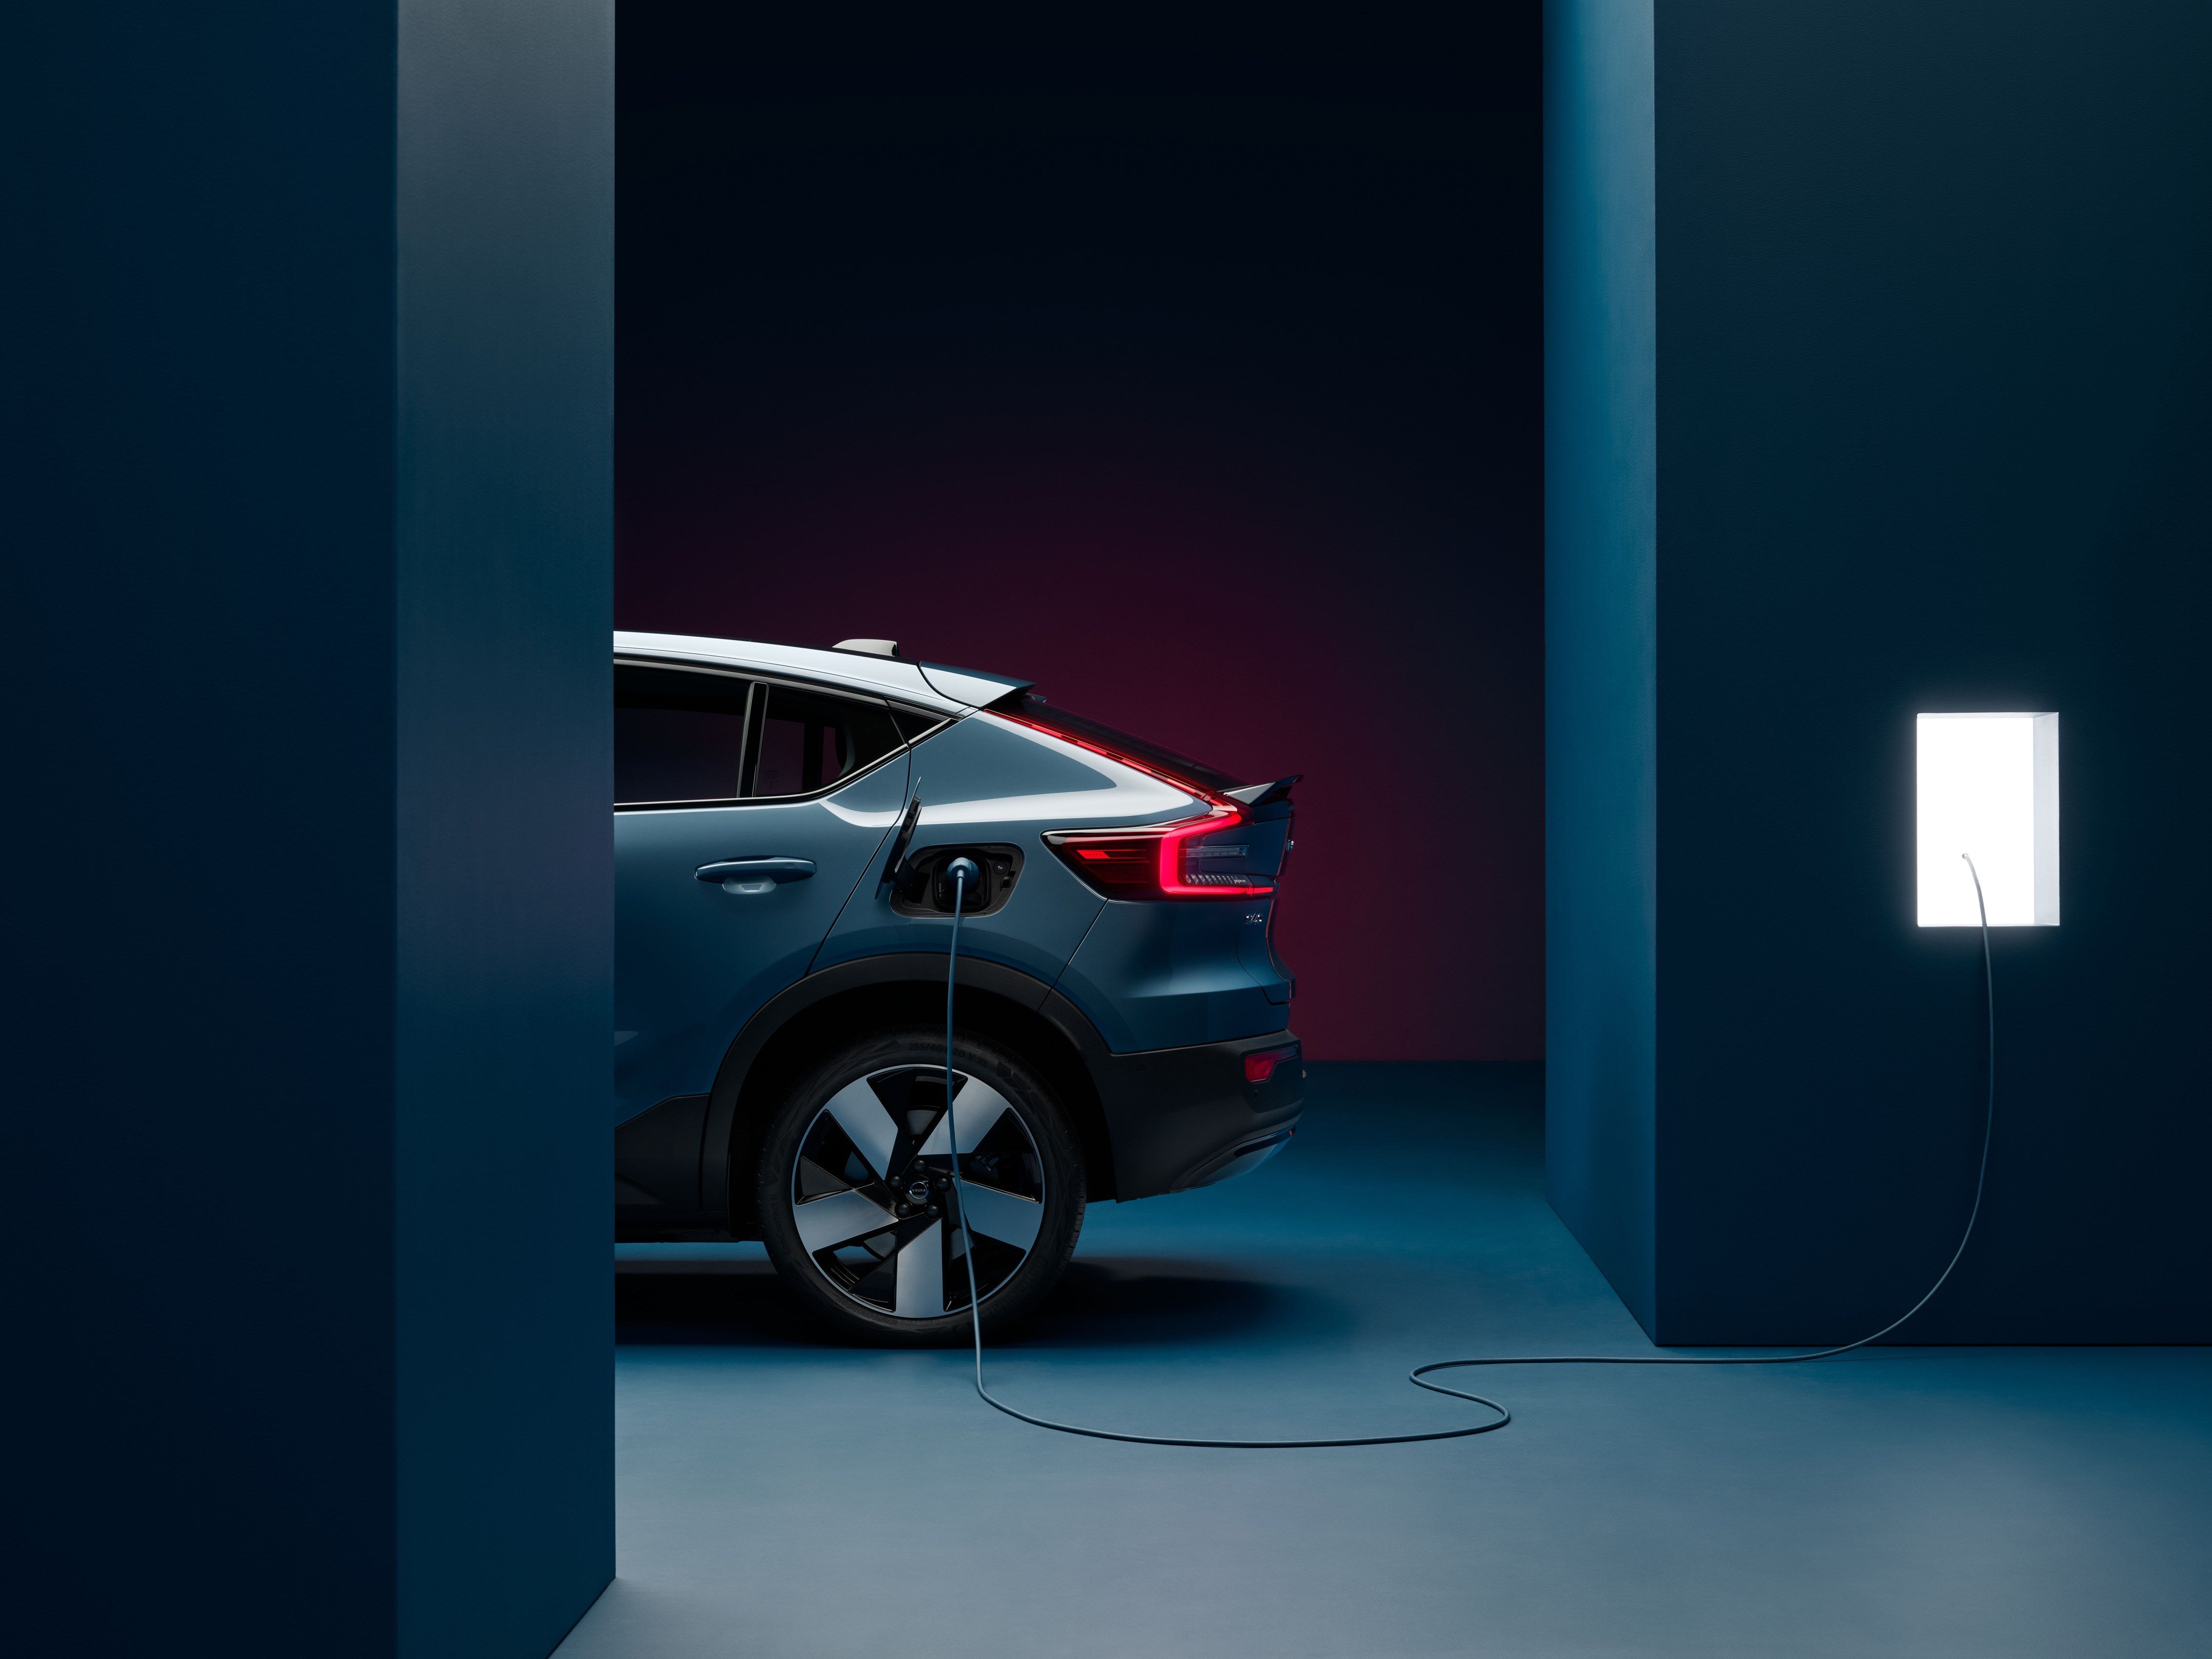 2022 Volvo C40 in blue charging press photo